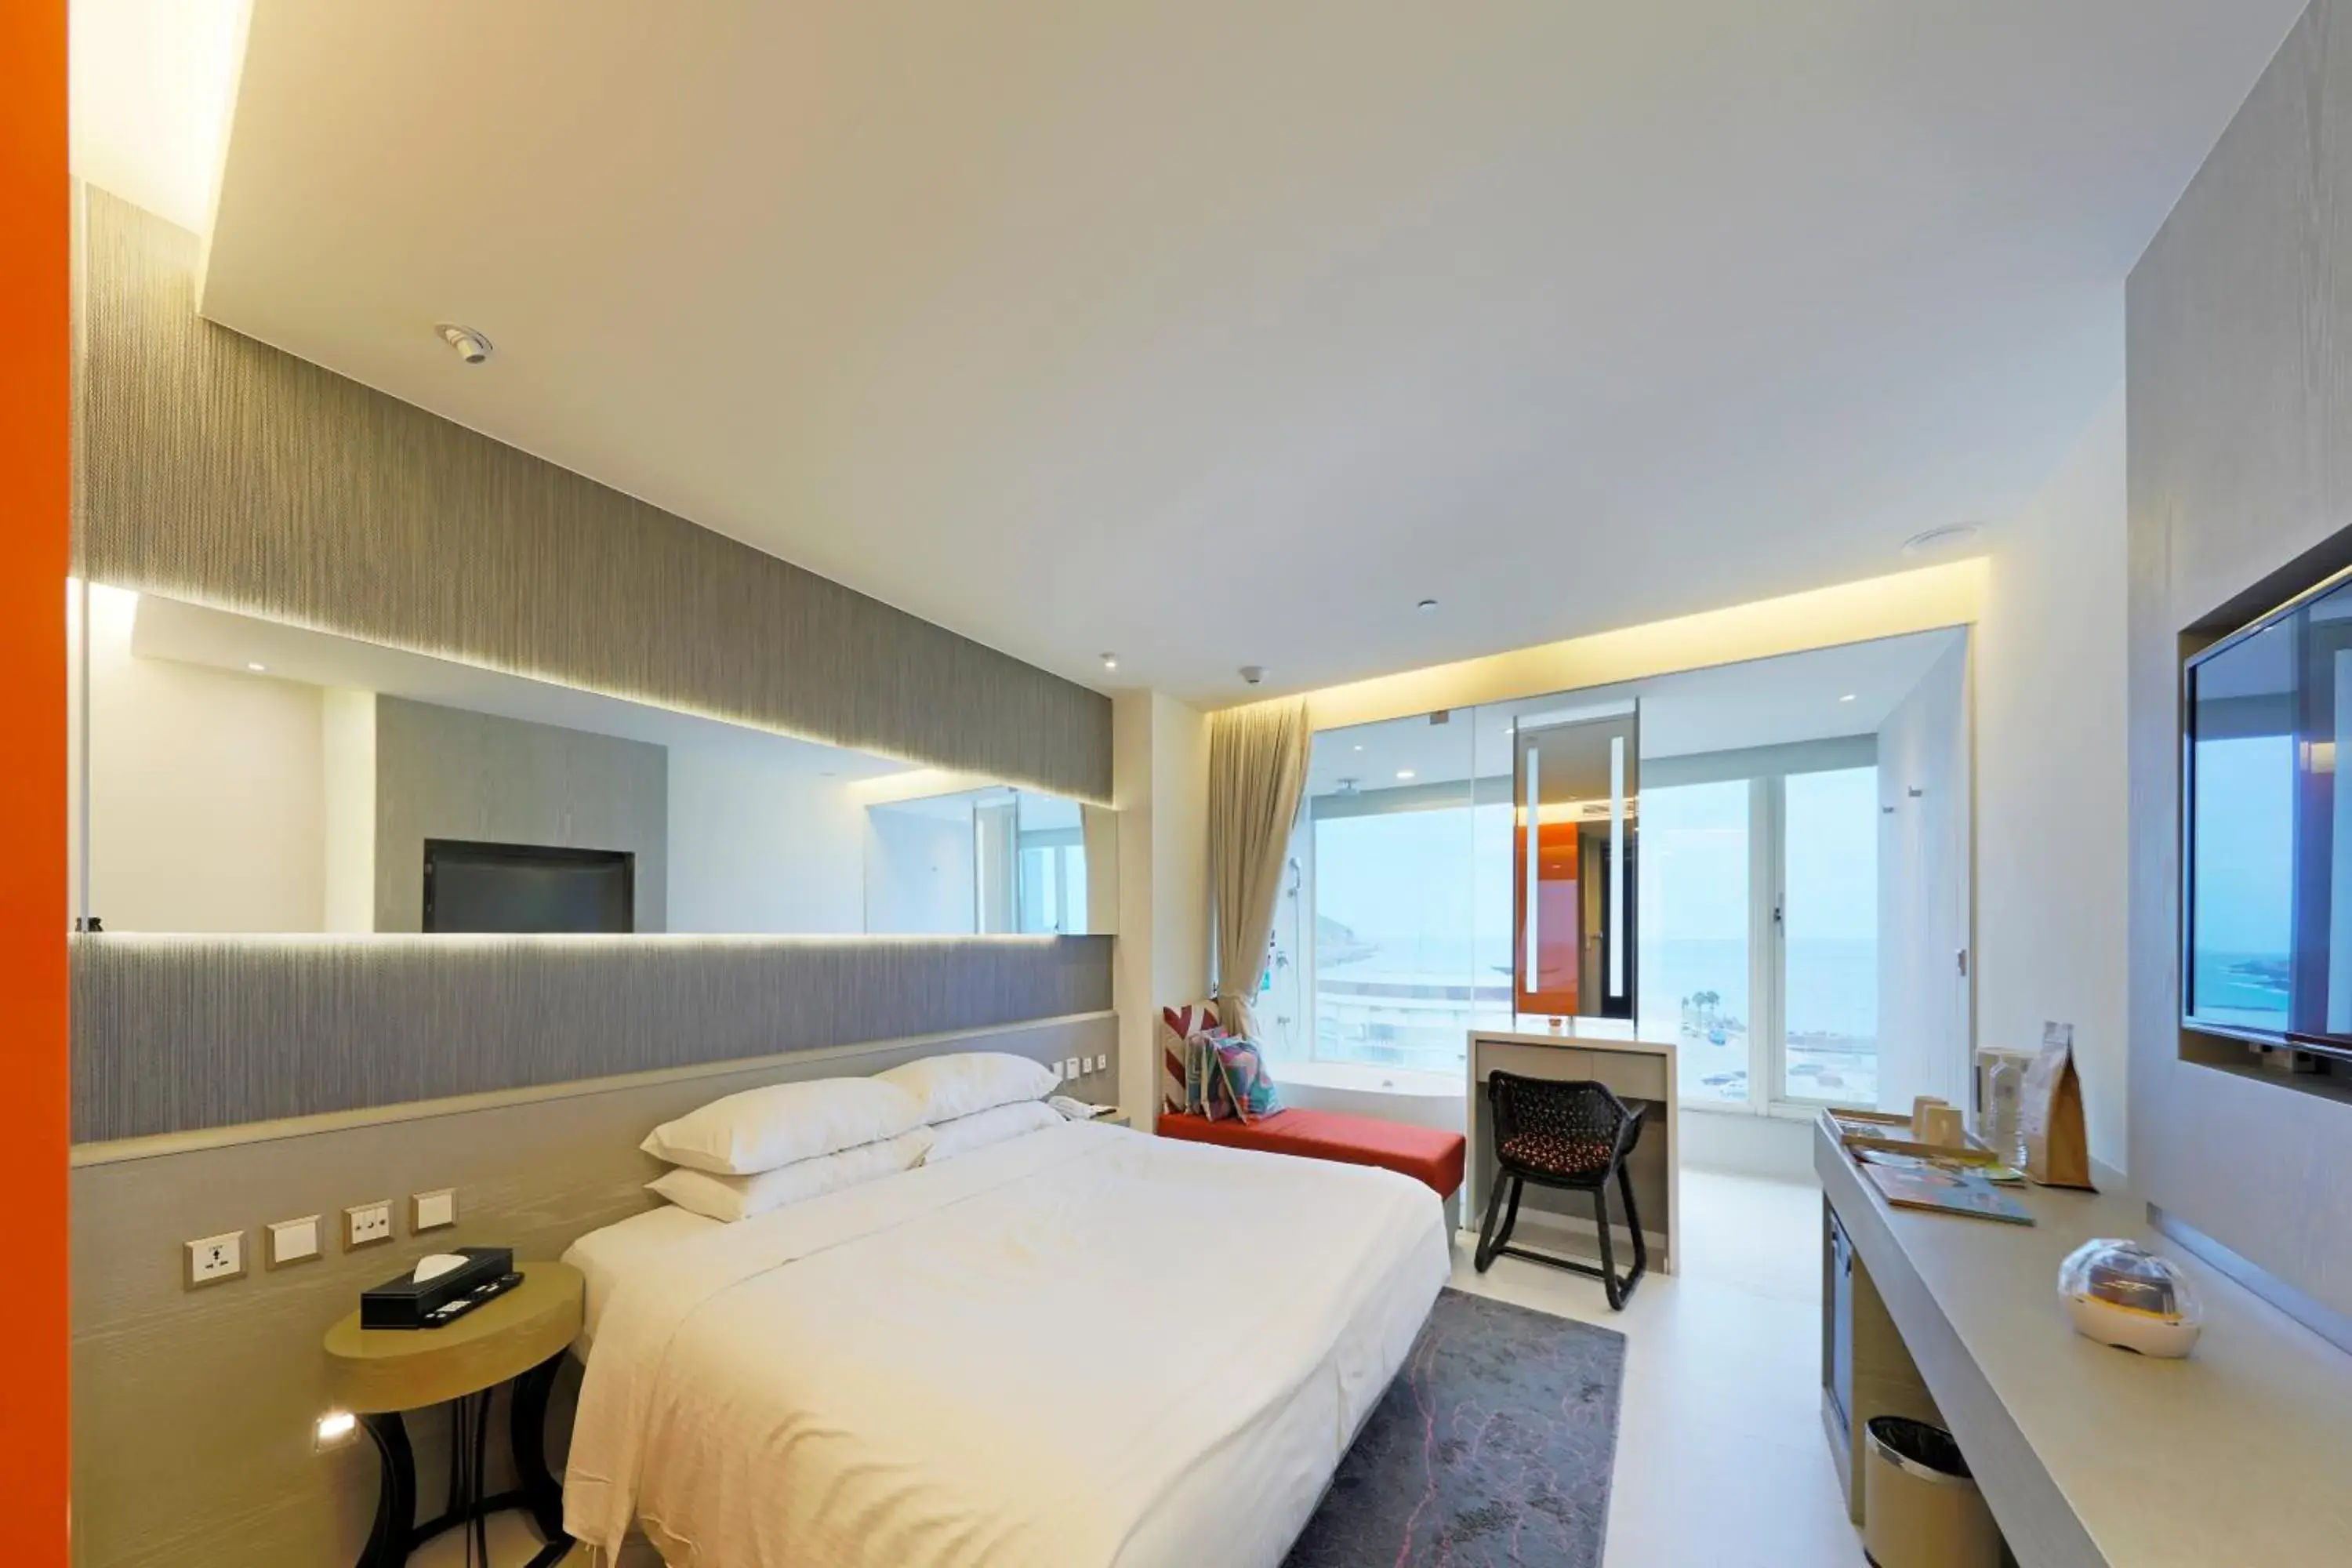 Photo of the whole room in Inhouse Hotel Yehliu